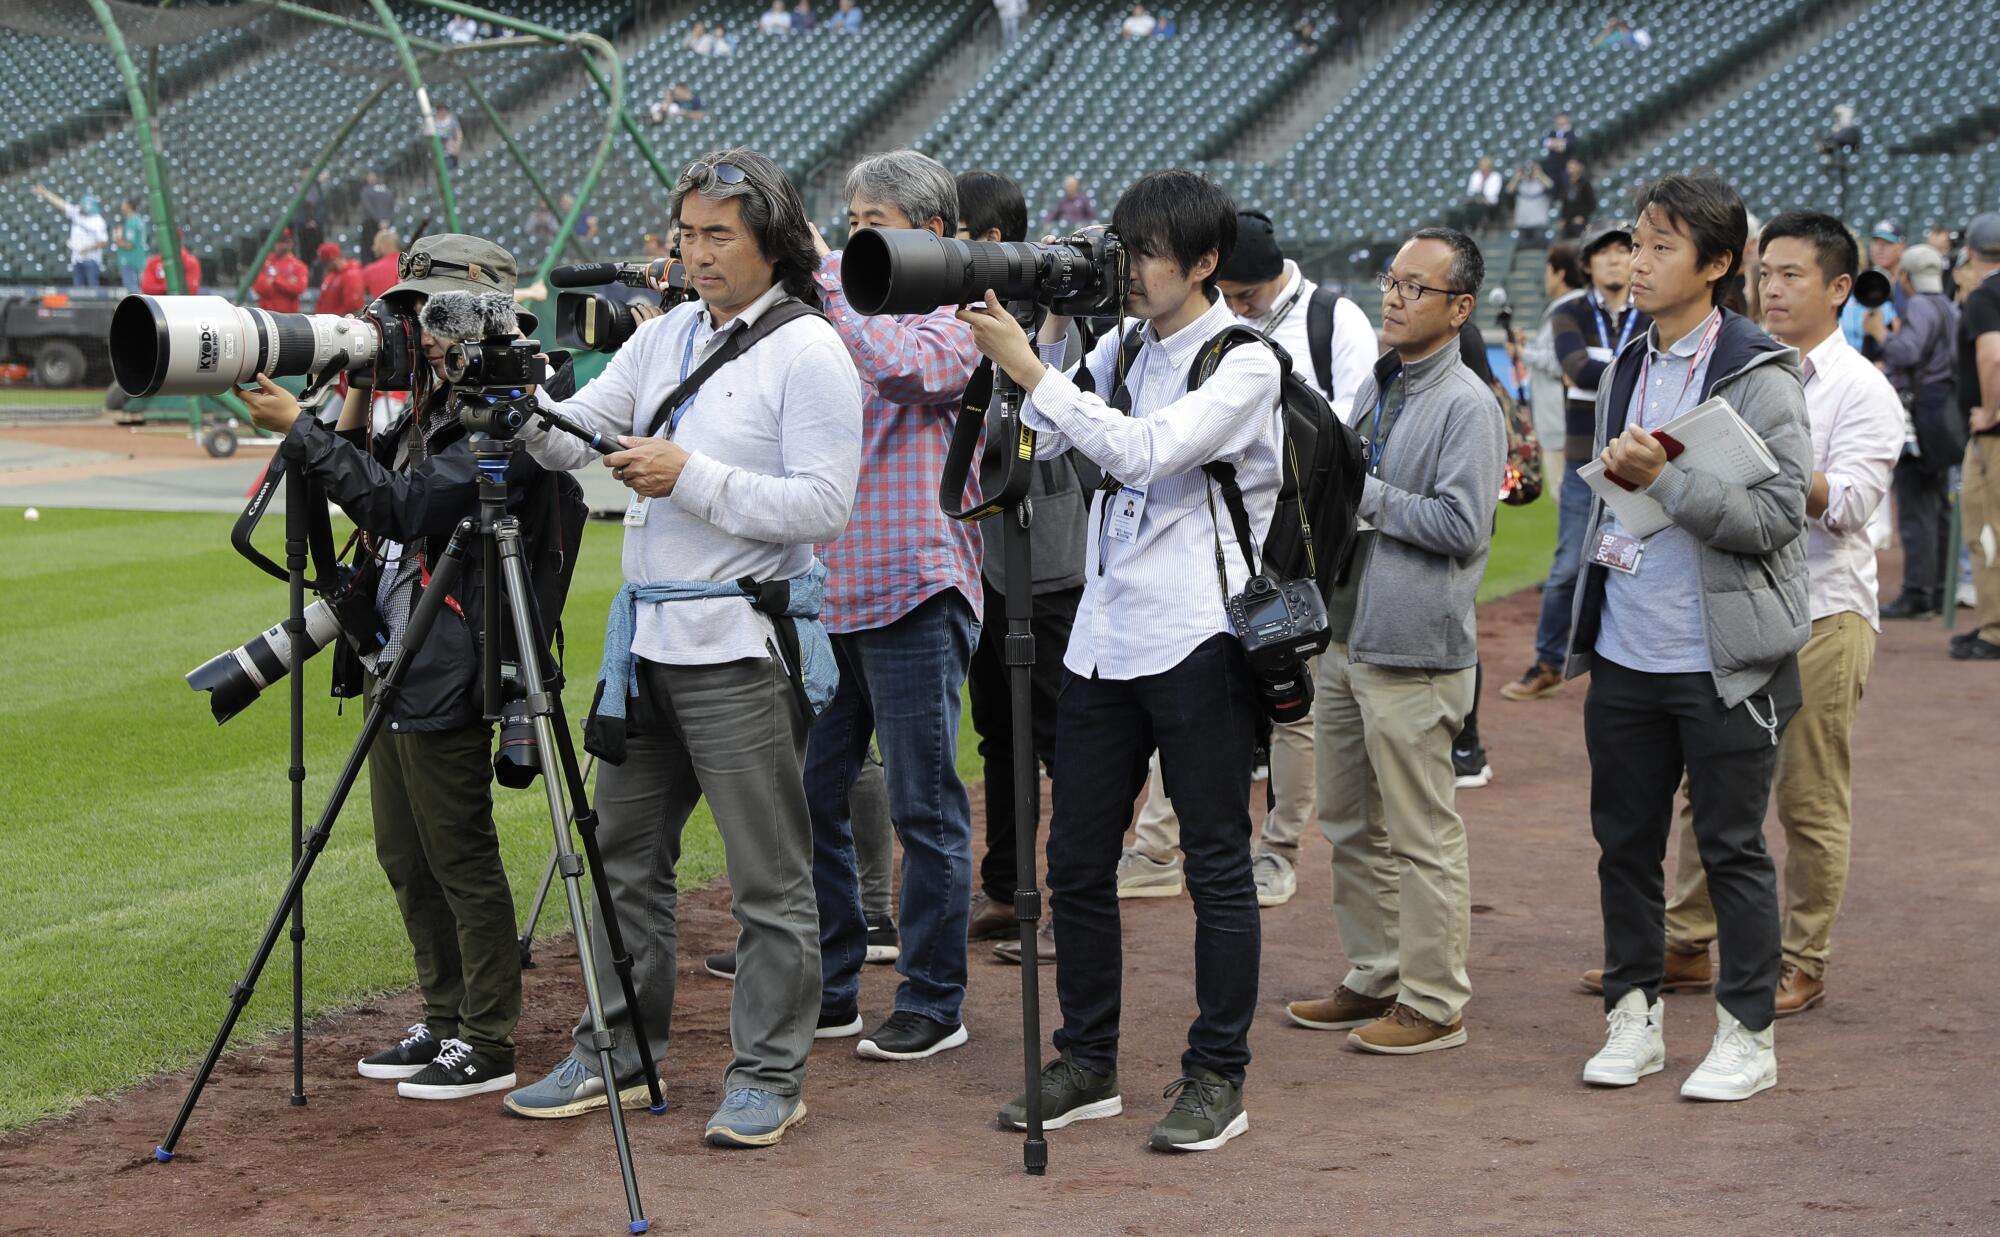 Members of the Japanese media watch the Angels' Shohei Ohtani throw in the outfield during practice in 2019.